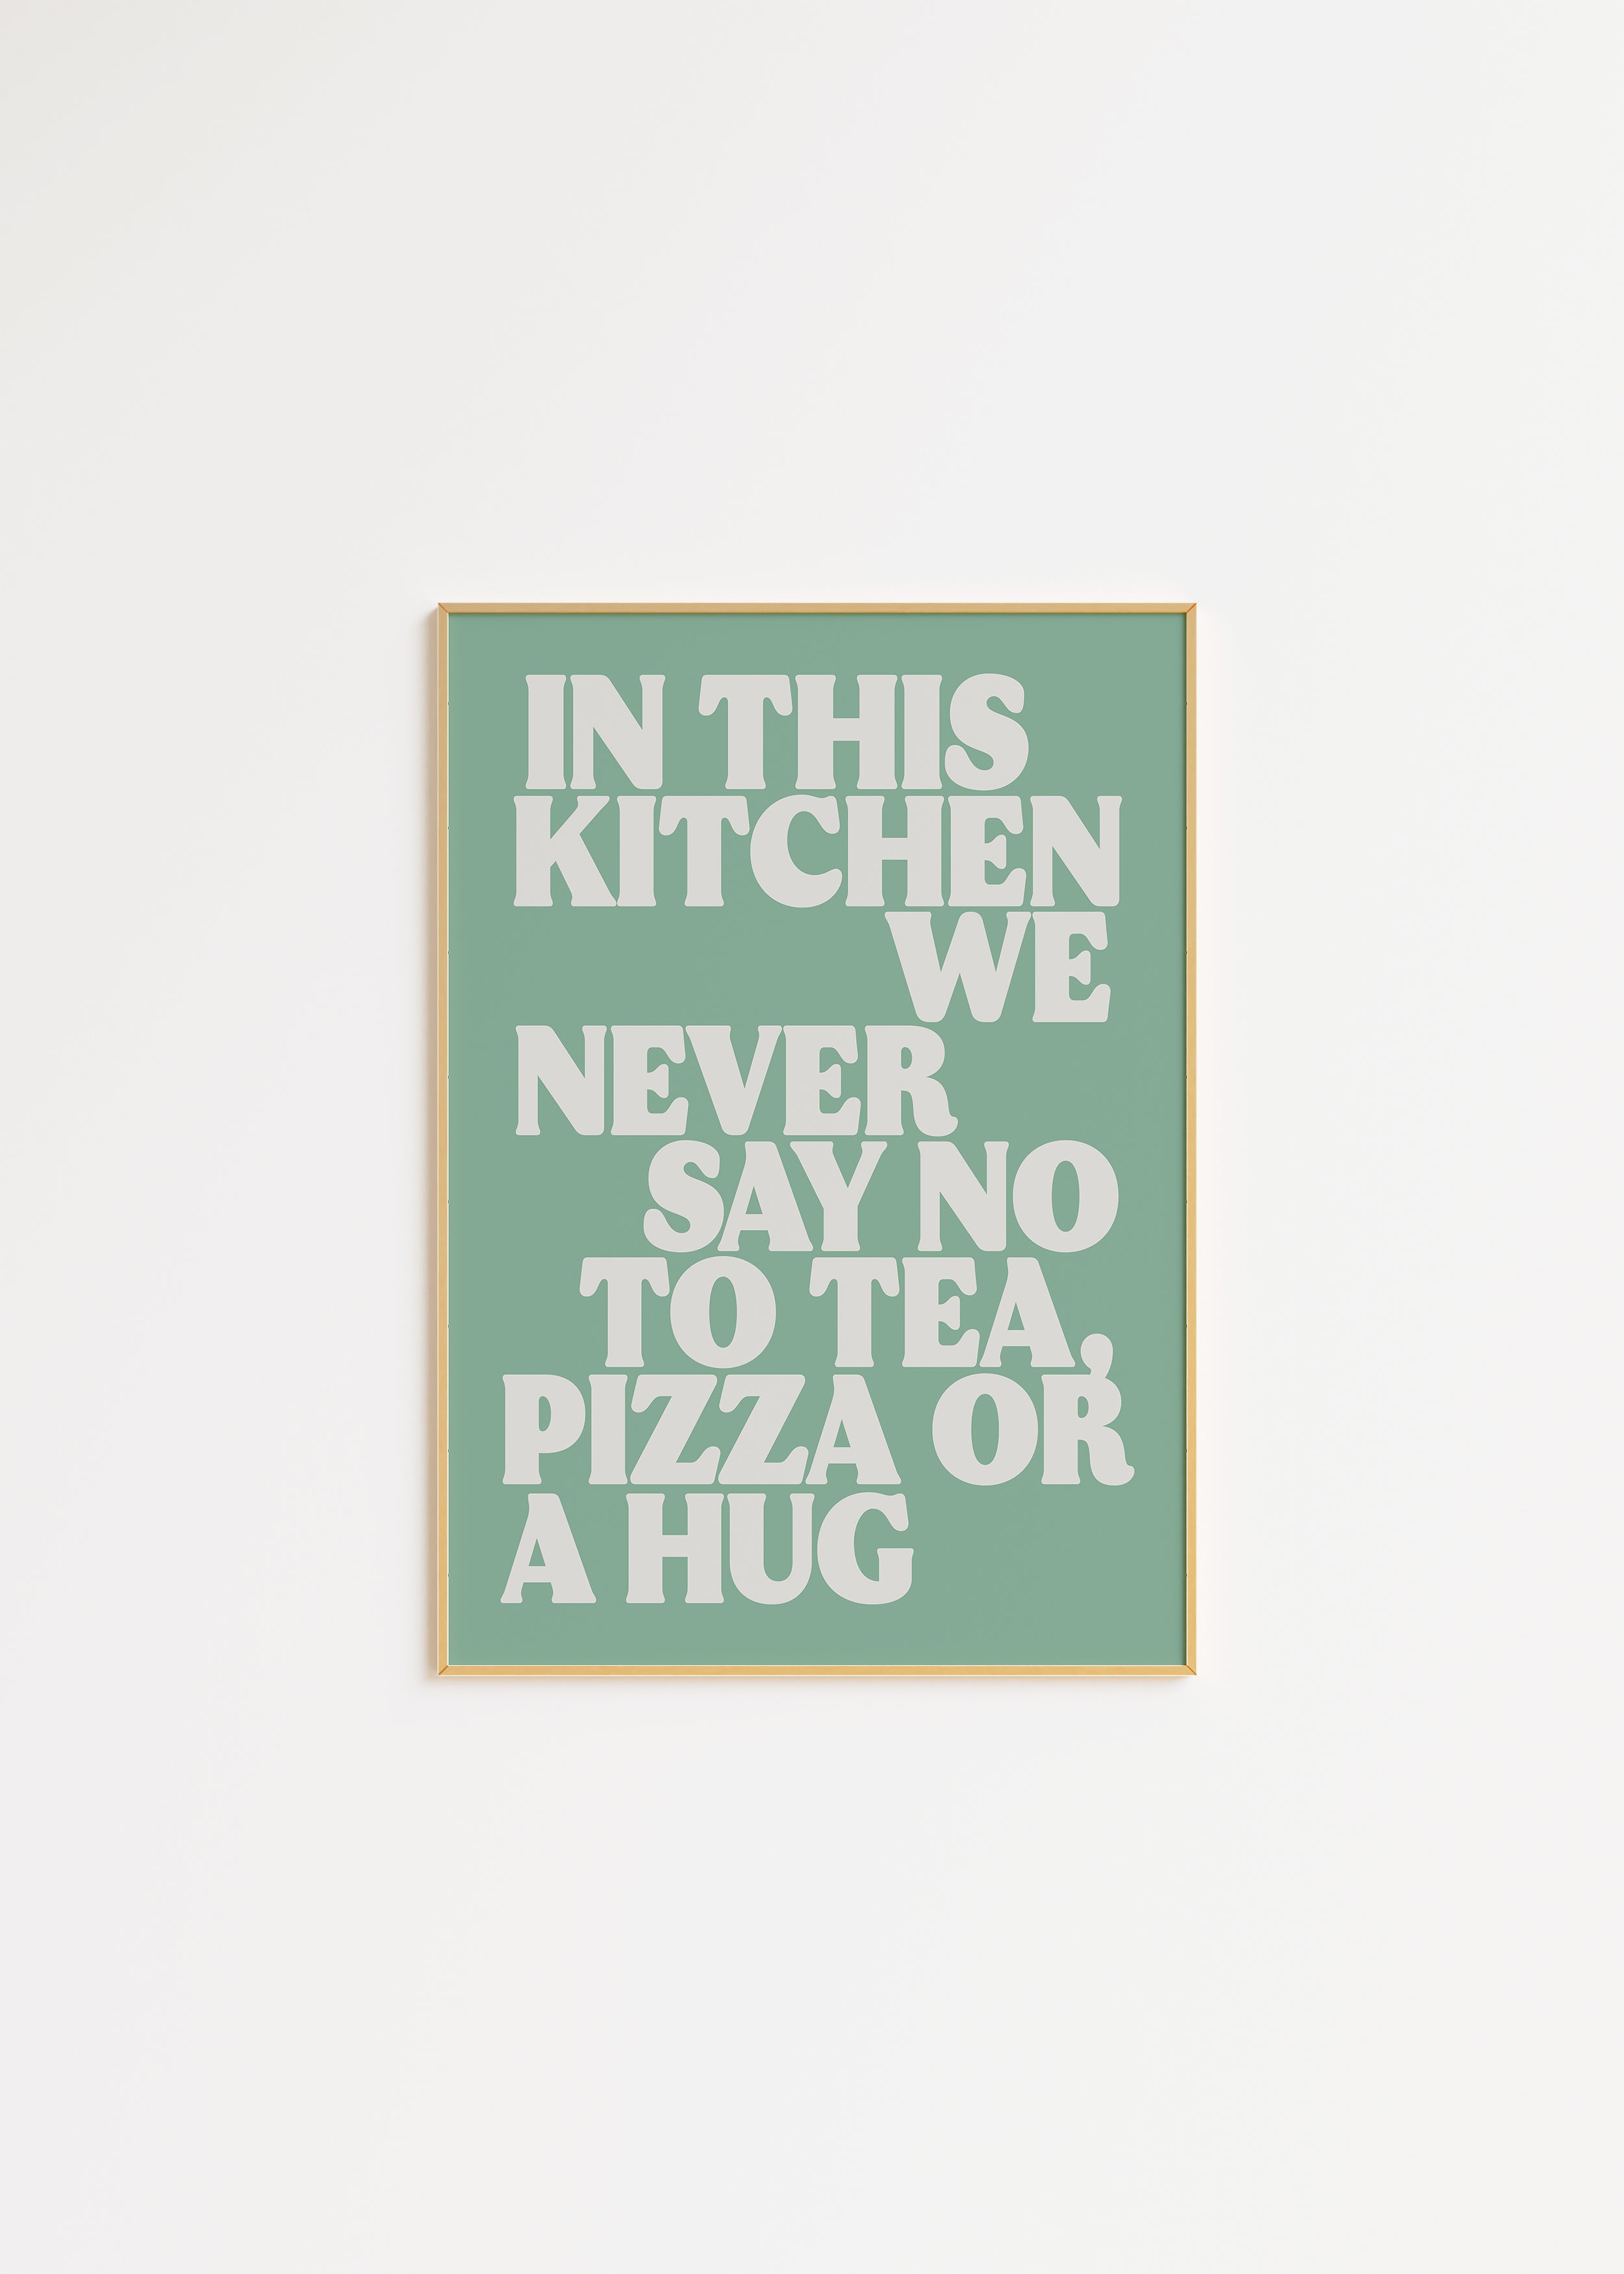 In This Kitchen We Never Say No To Tea, Pizza or a Hug in Green Print A3